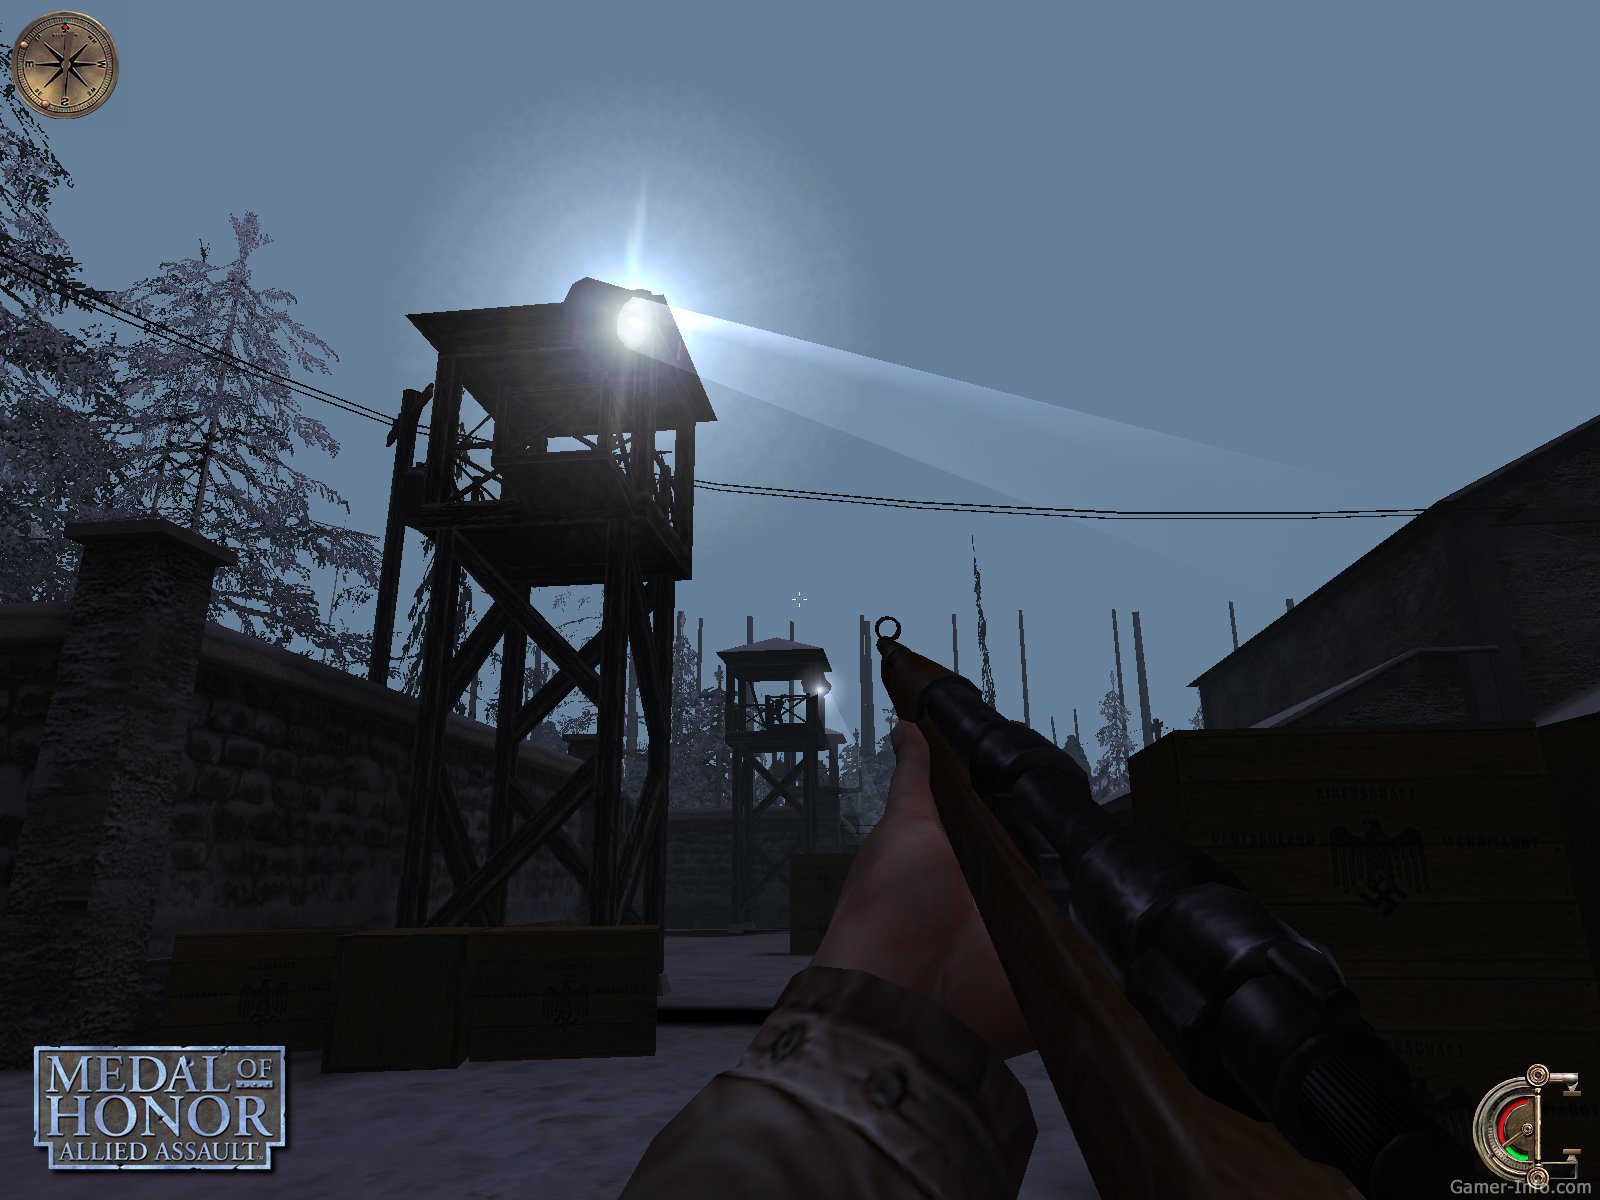 Medal of honor 2002. Medal of Honor: Allied Assault (2002). Медаль оф хонор Allied Assault. Medal of Honor: Allied Assault – Spearhead (2002). Medal of Honor Allied Assault (2002 год).